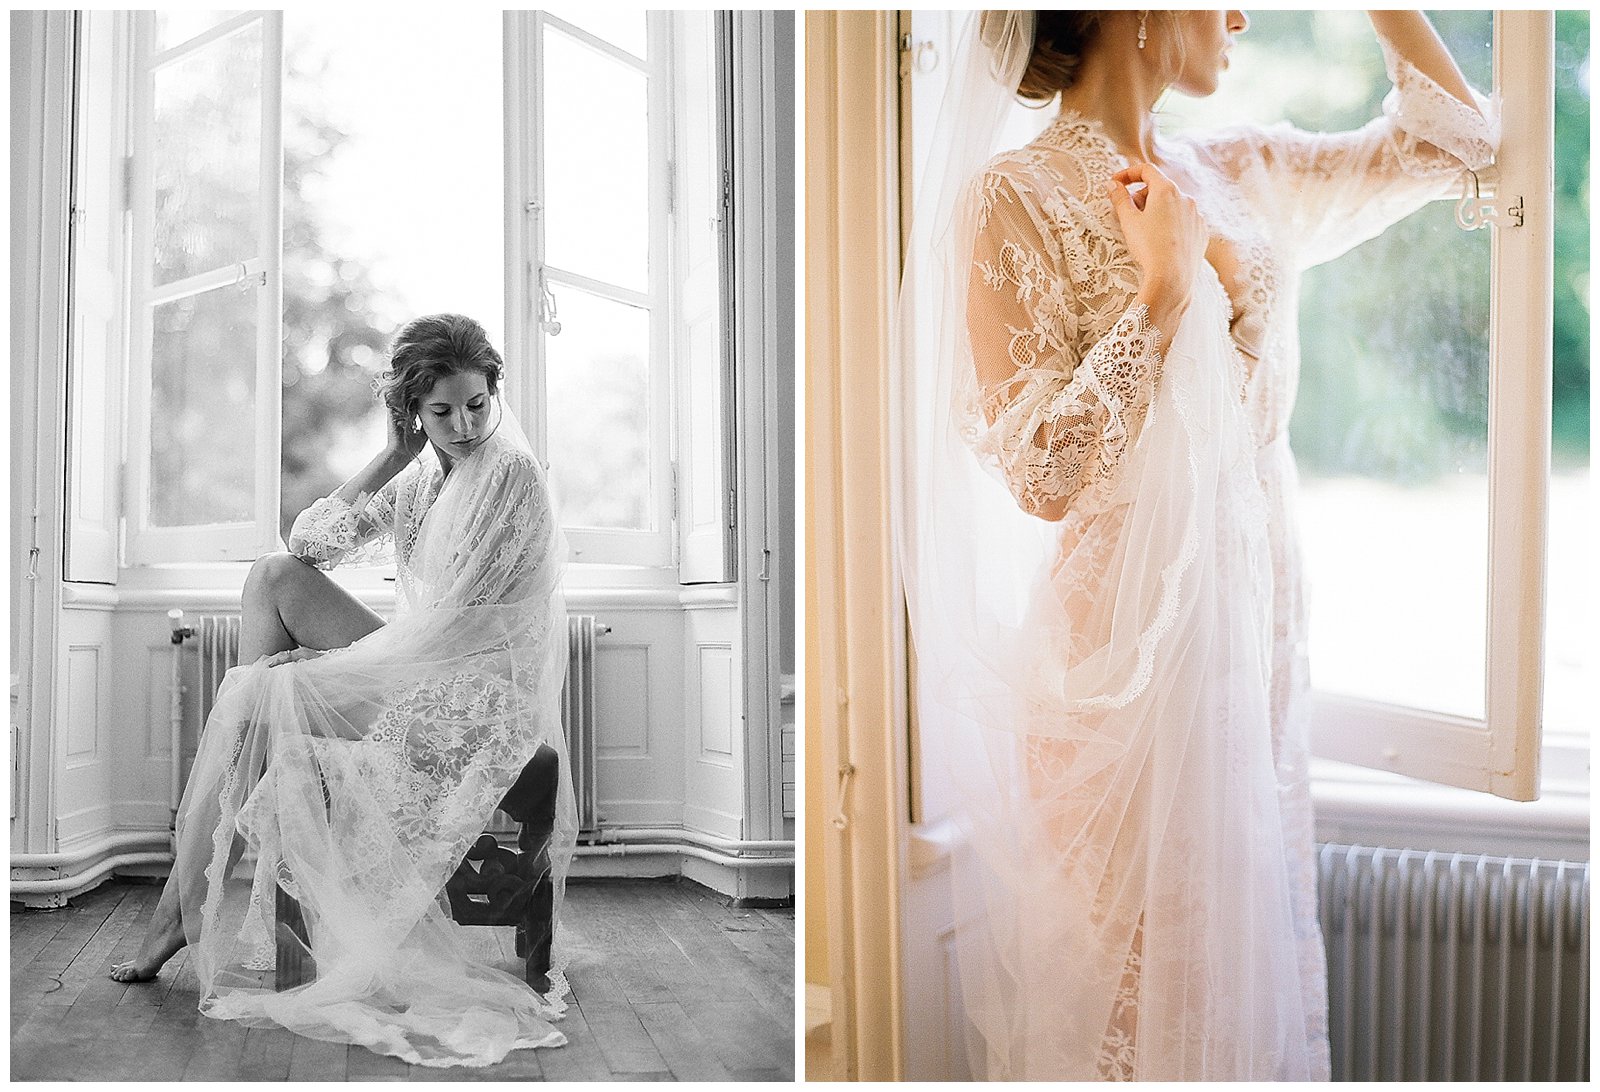 Early Morning Boudoir and Movement - The Ganeys | Fine Art Film Wedding ...